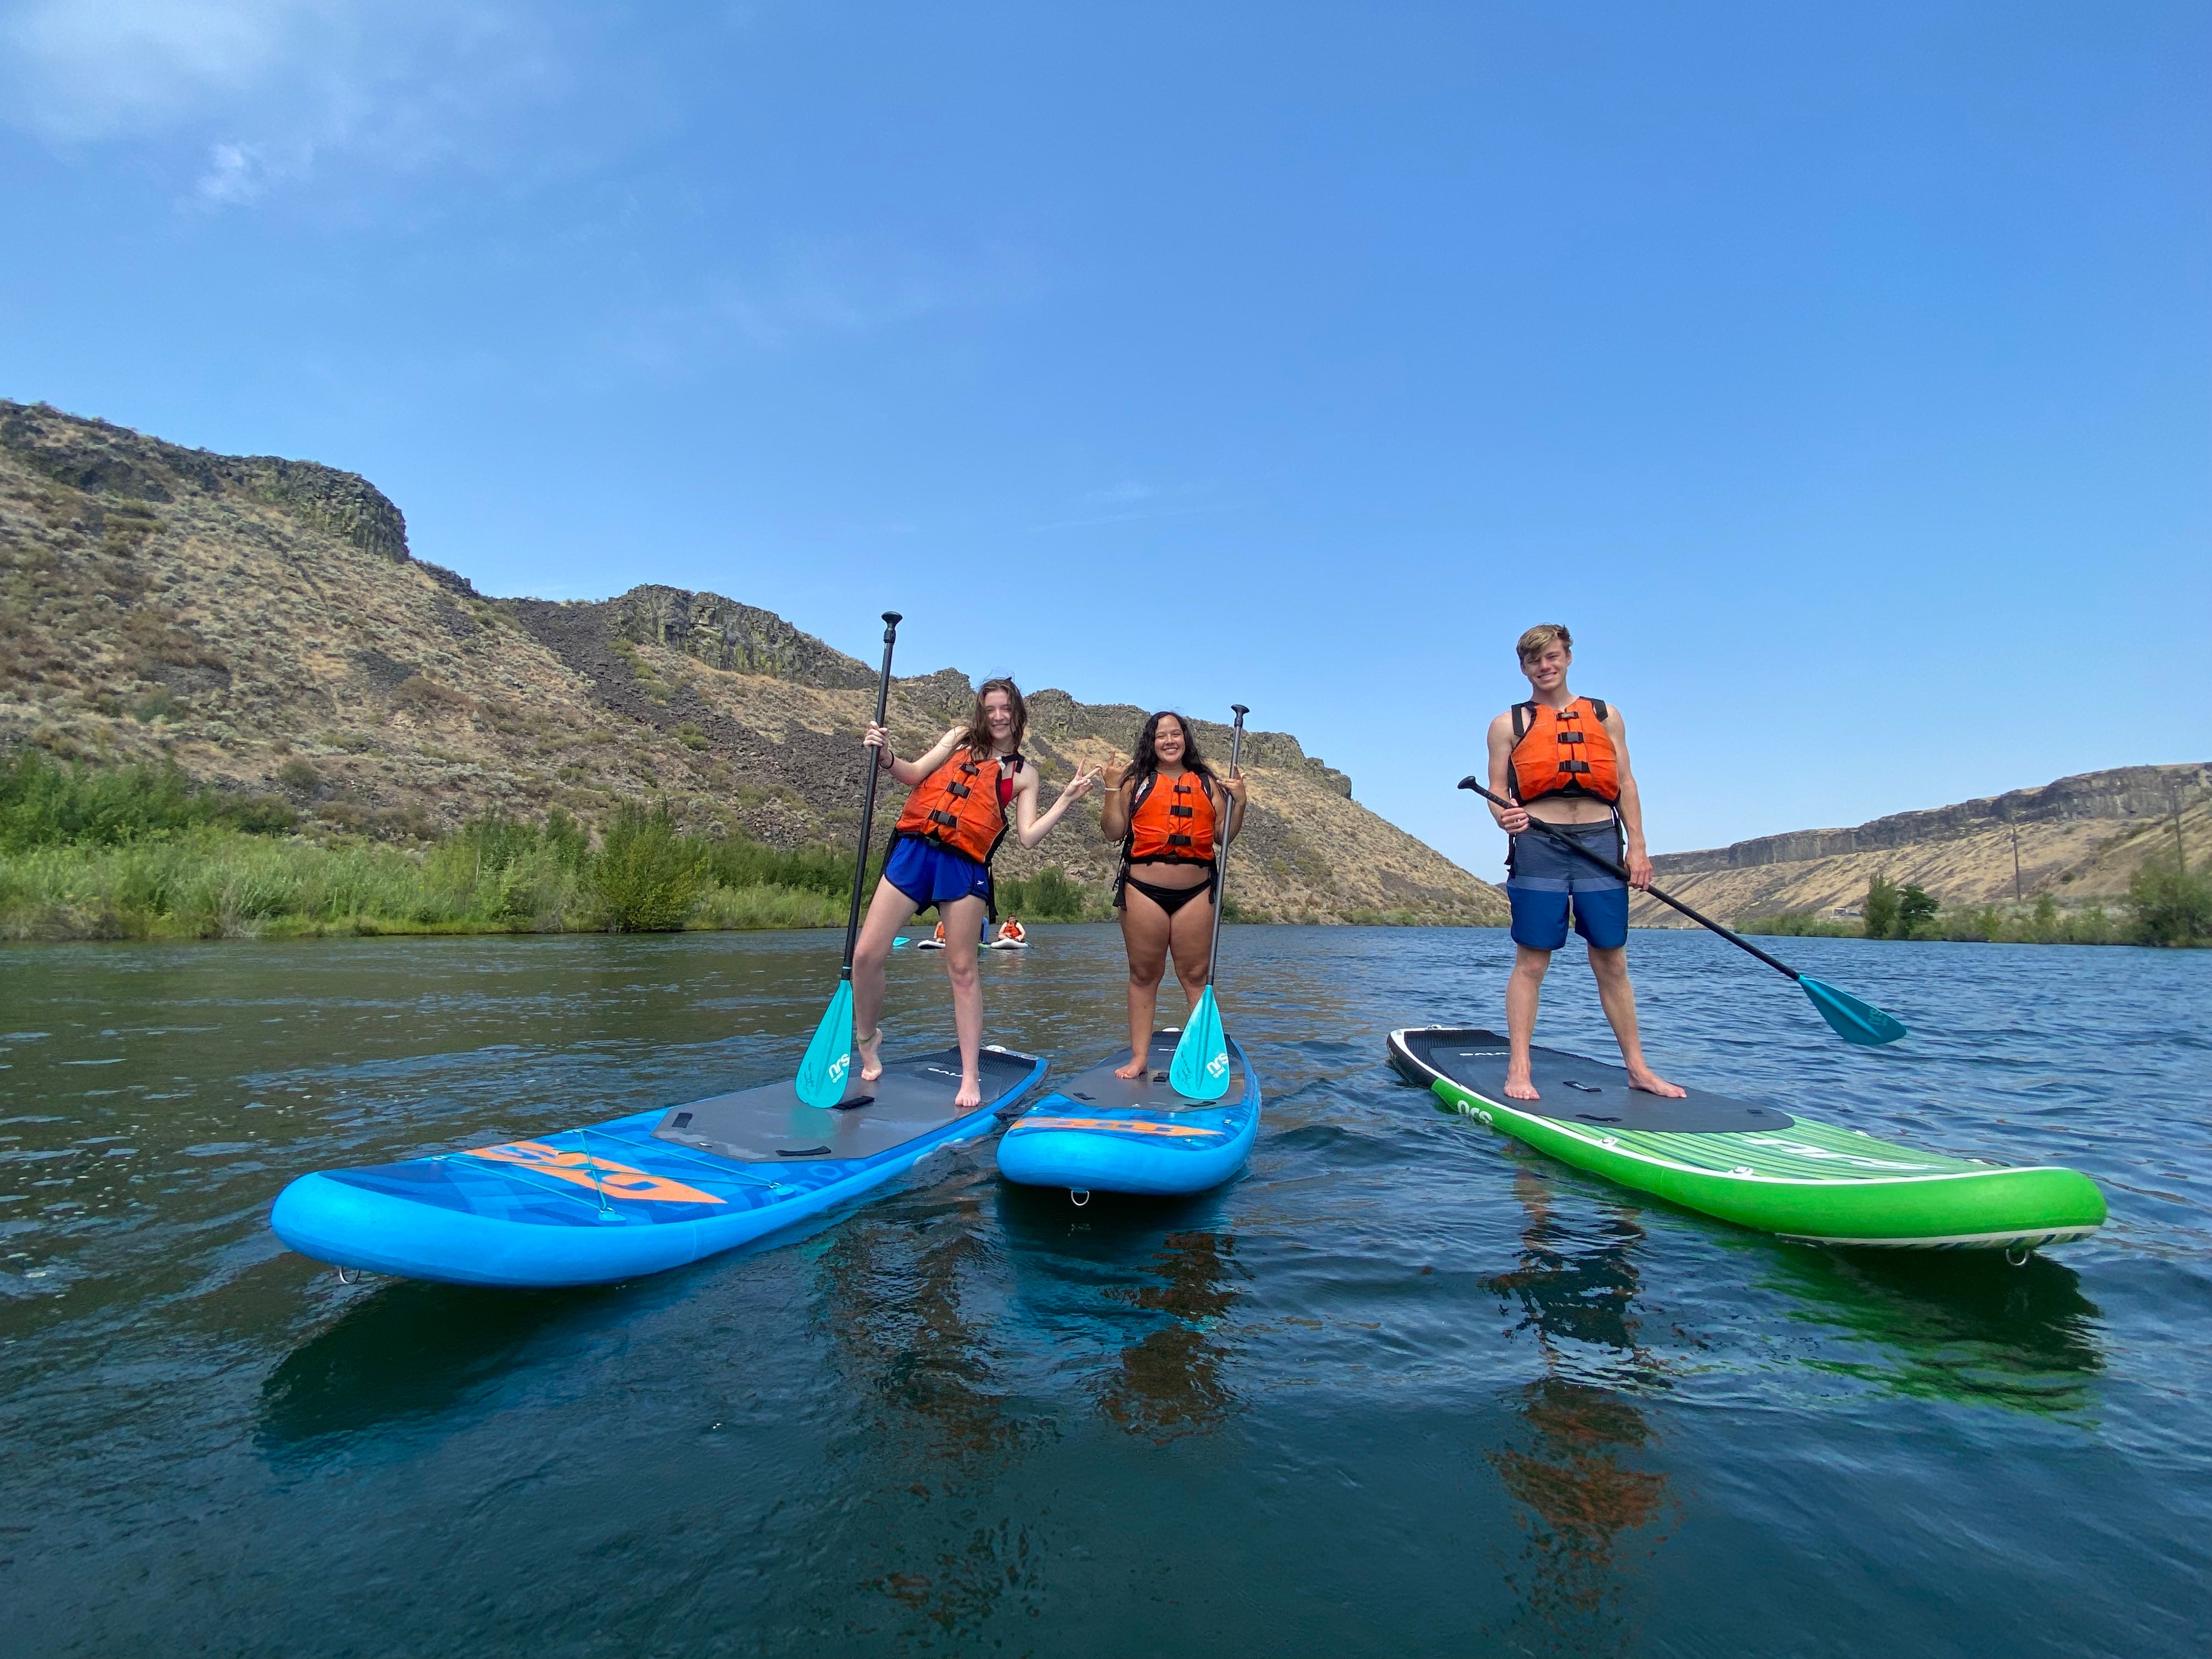 Students stand on paddle boards on the river